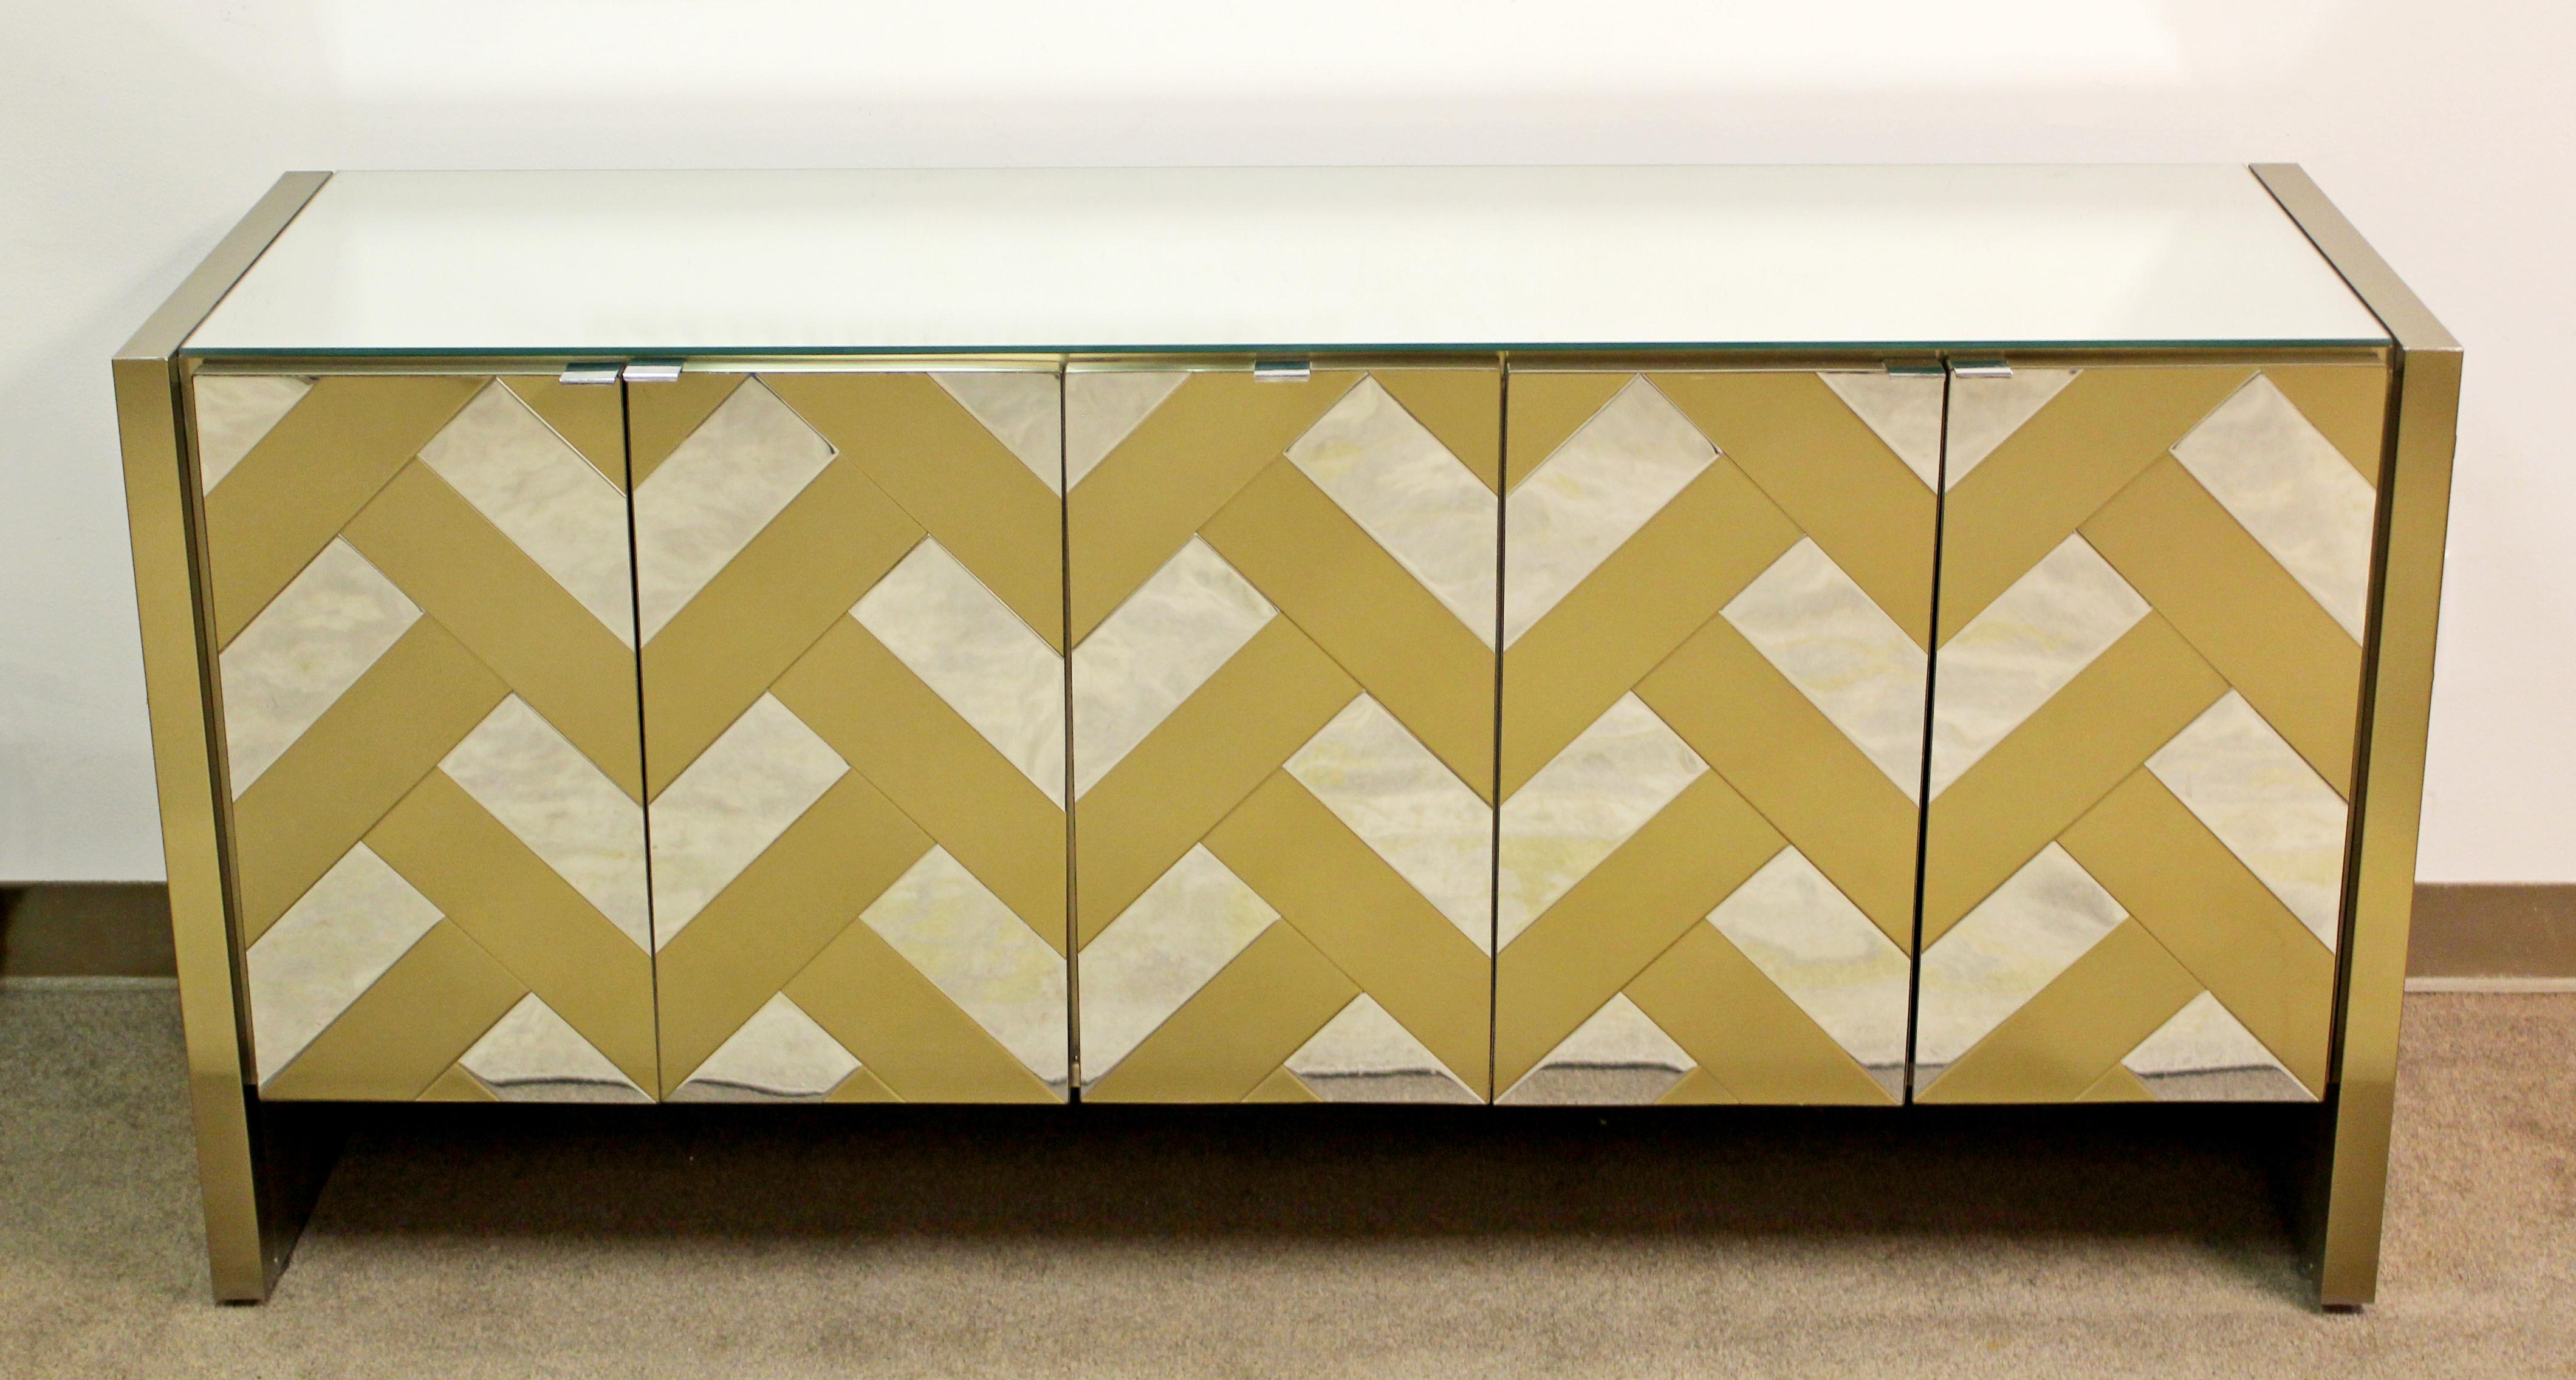 For your consideration is a magnificent credenza, made of patterned brass and mirror, by Ello, circa 1970s. In excellent vintage condition. The dimensions are 63.5